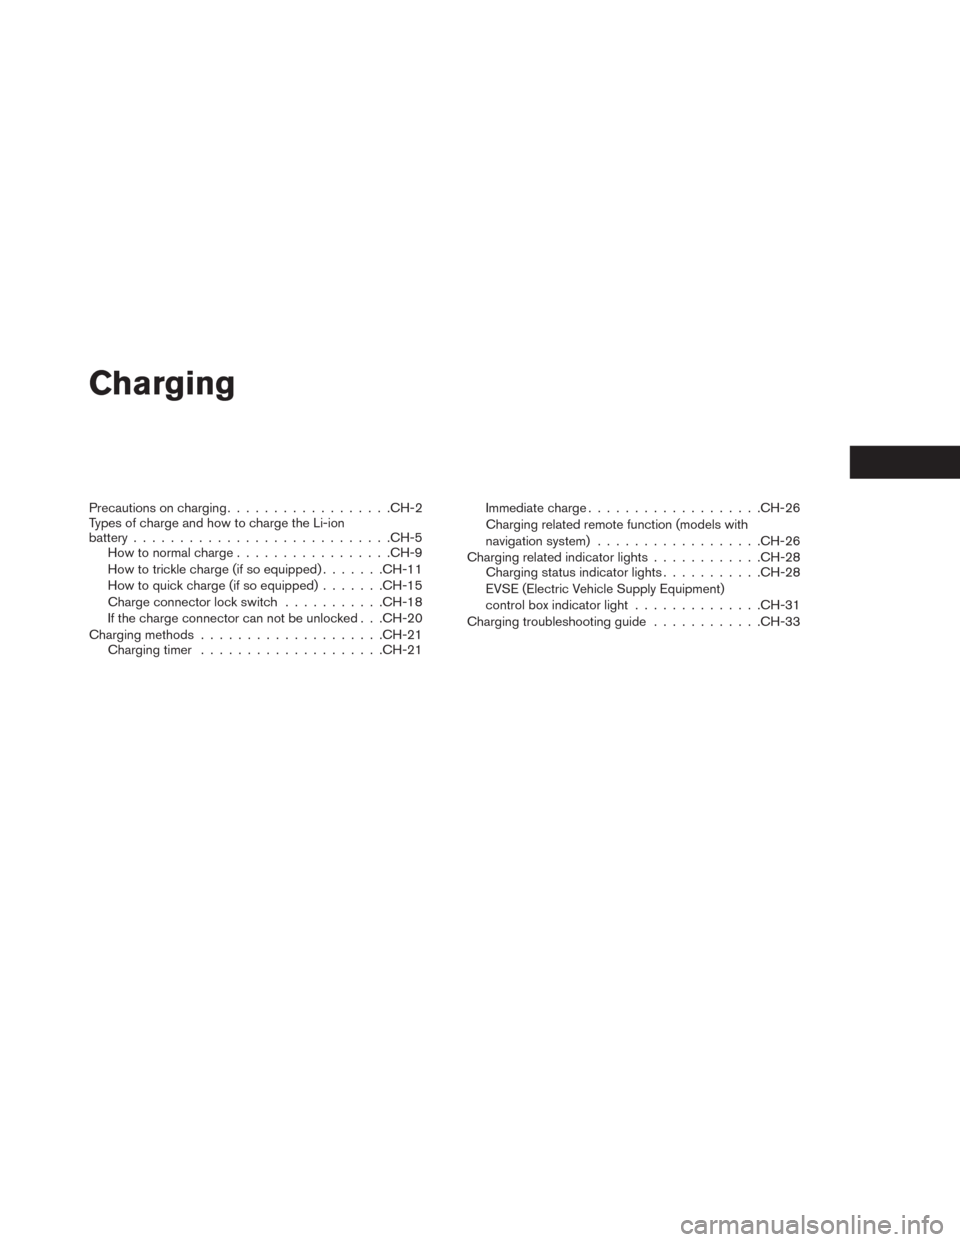 NISSAN LEAF 2014 1.G Workshop Manual Charging
Precautions on charging..................CH-2
Types of charge and how to charge the Li-ion
battery............................CH-5
How to normal charge.................CH-9
How to trickle cha